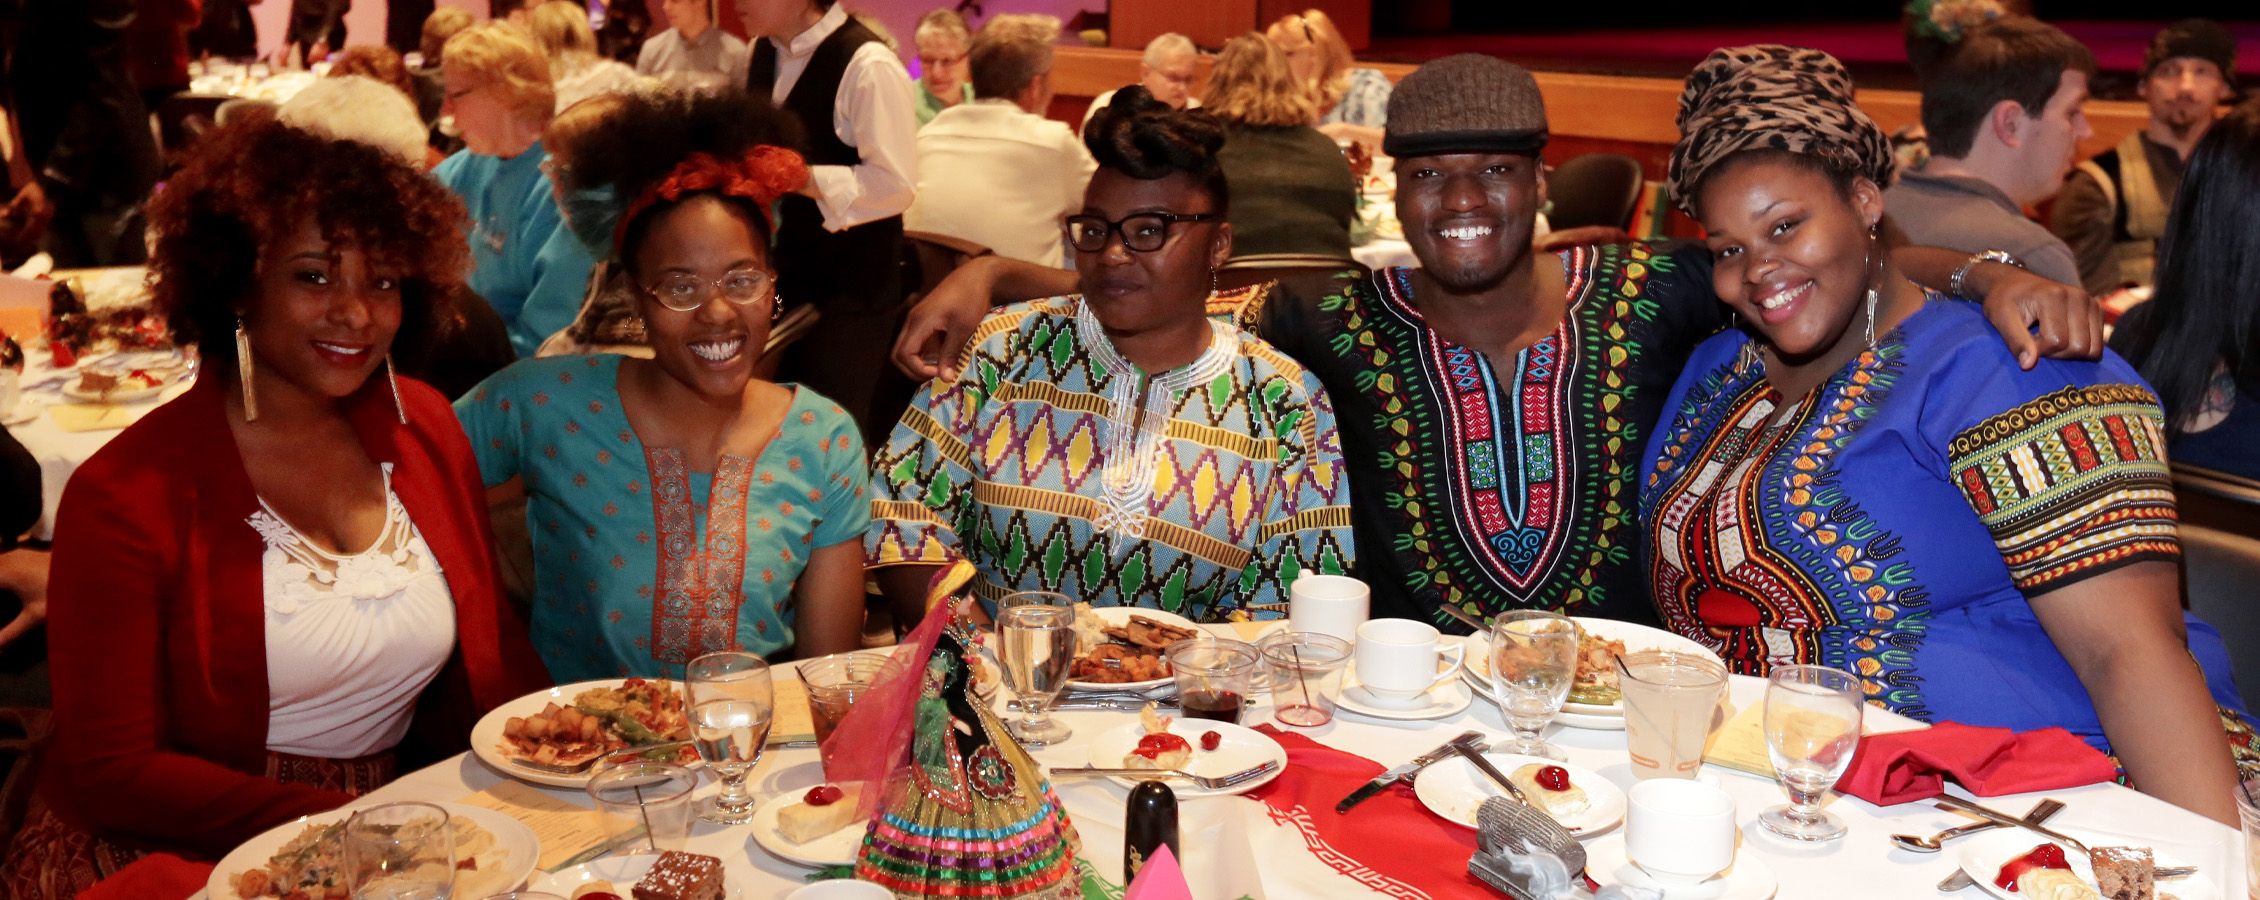 A group of international students group together at a banquet table and pose for a photo.